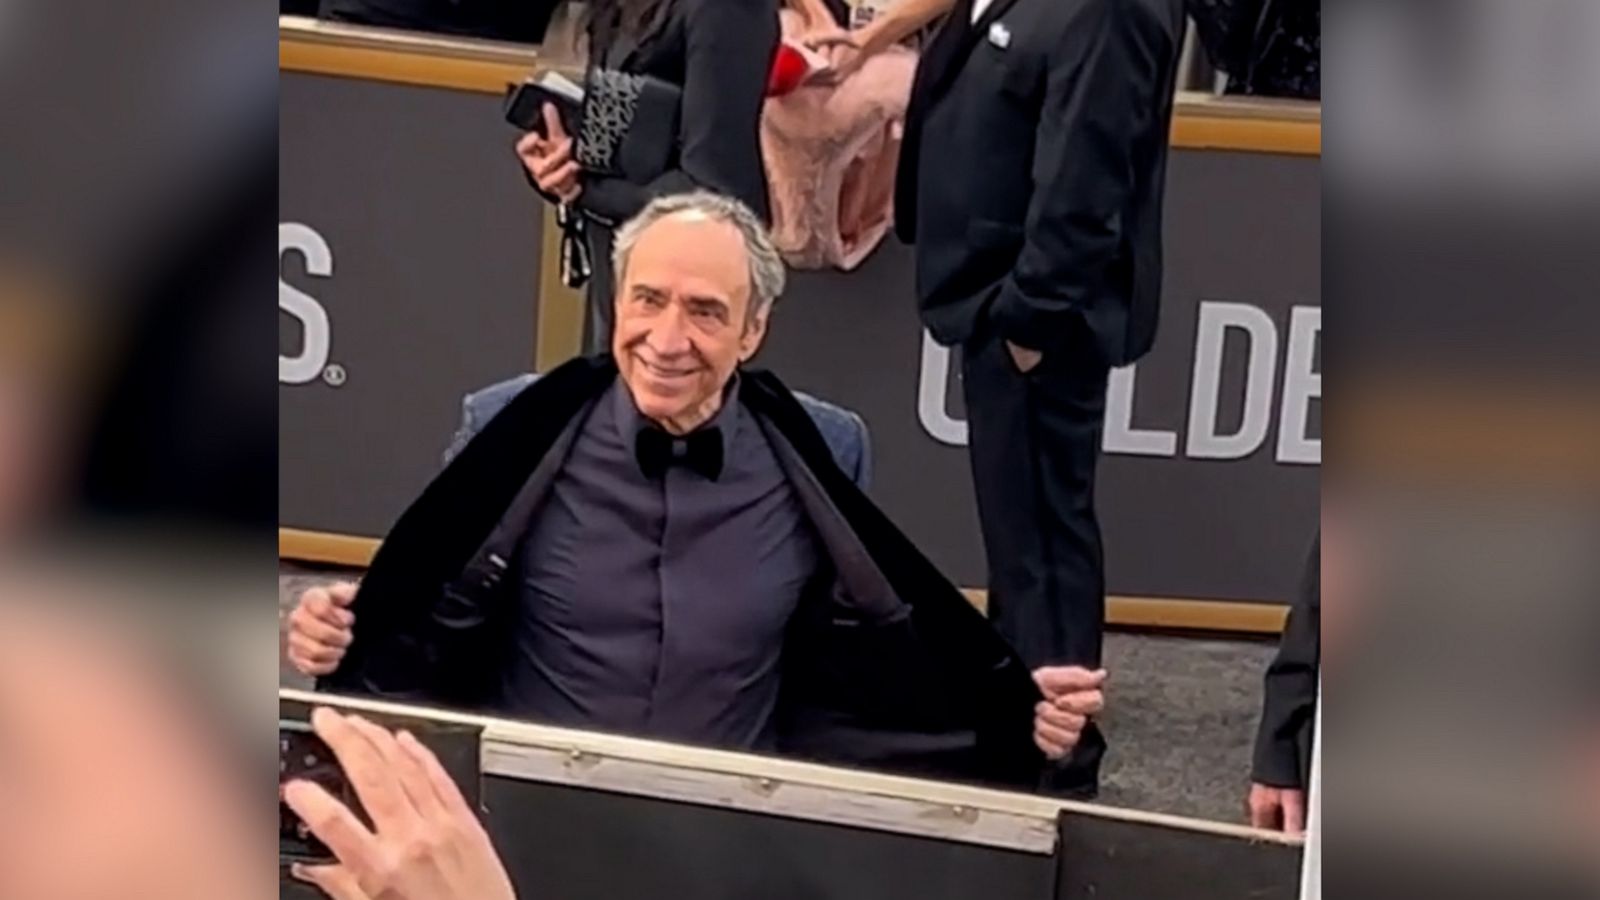 VIDEO: Watch F. Murray Abraham’s reaction when fans cheered for him at Golden Globes